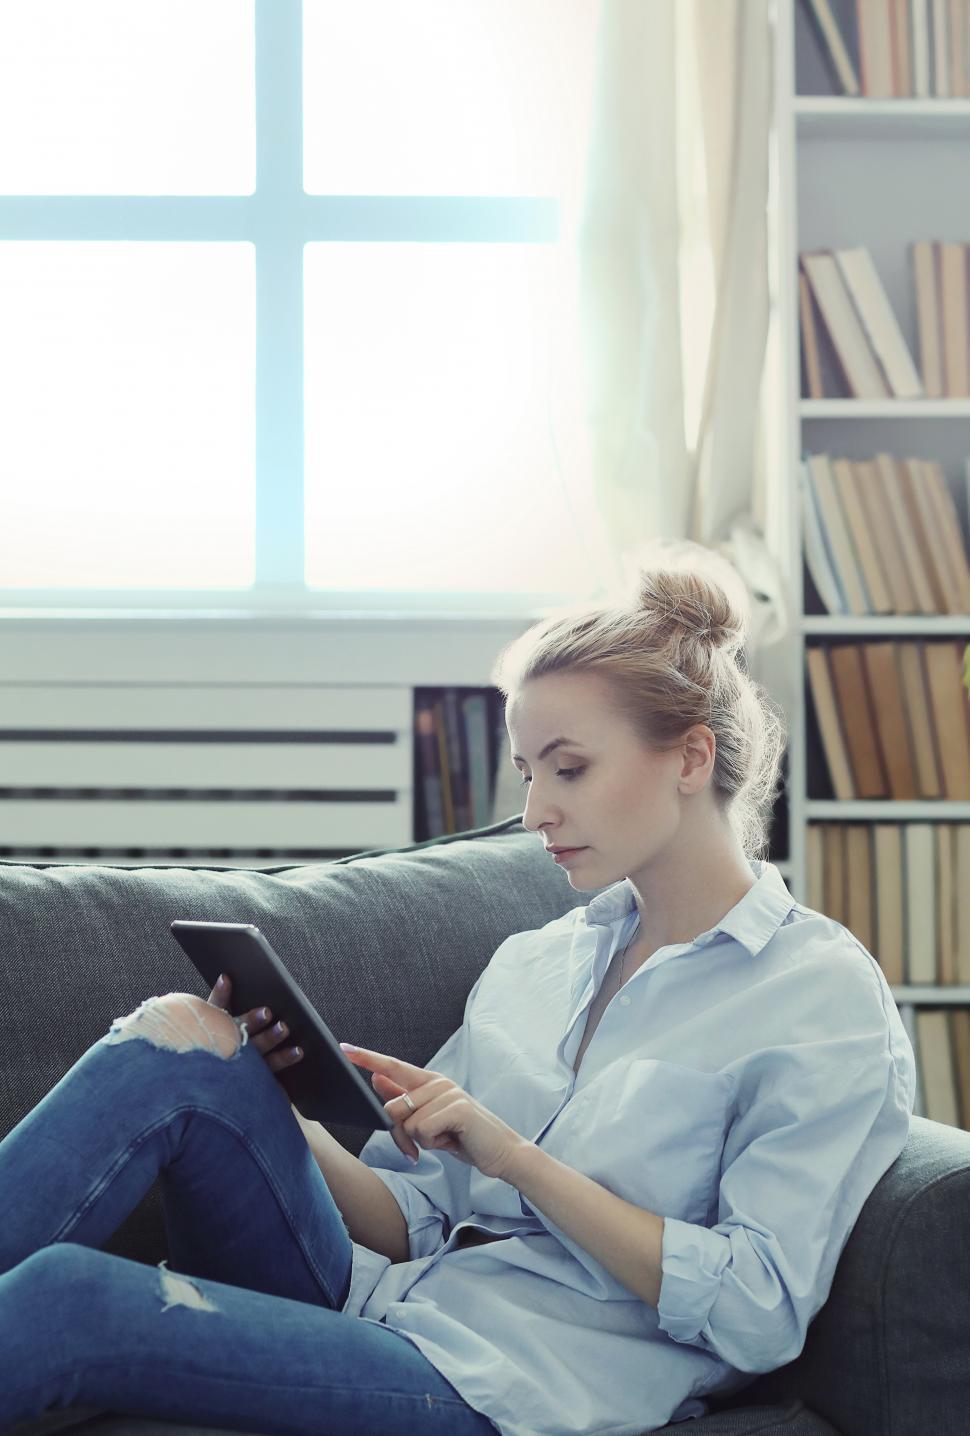 Free Image of Woman relaxing with tablet device 